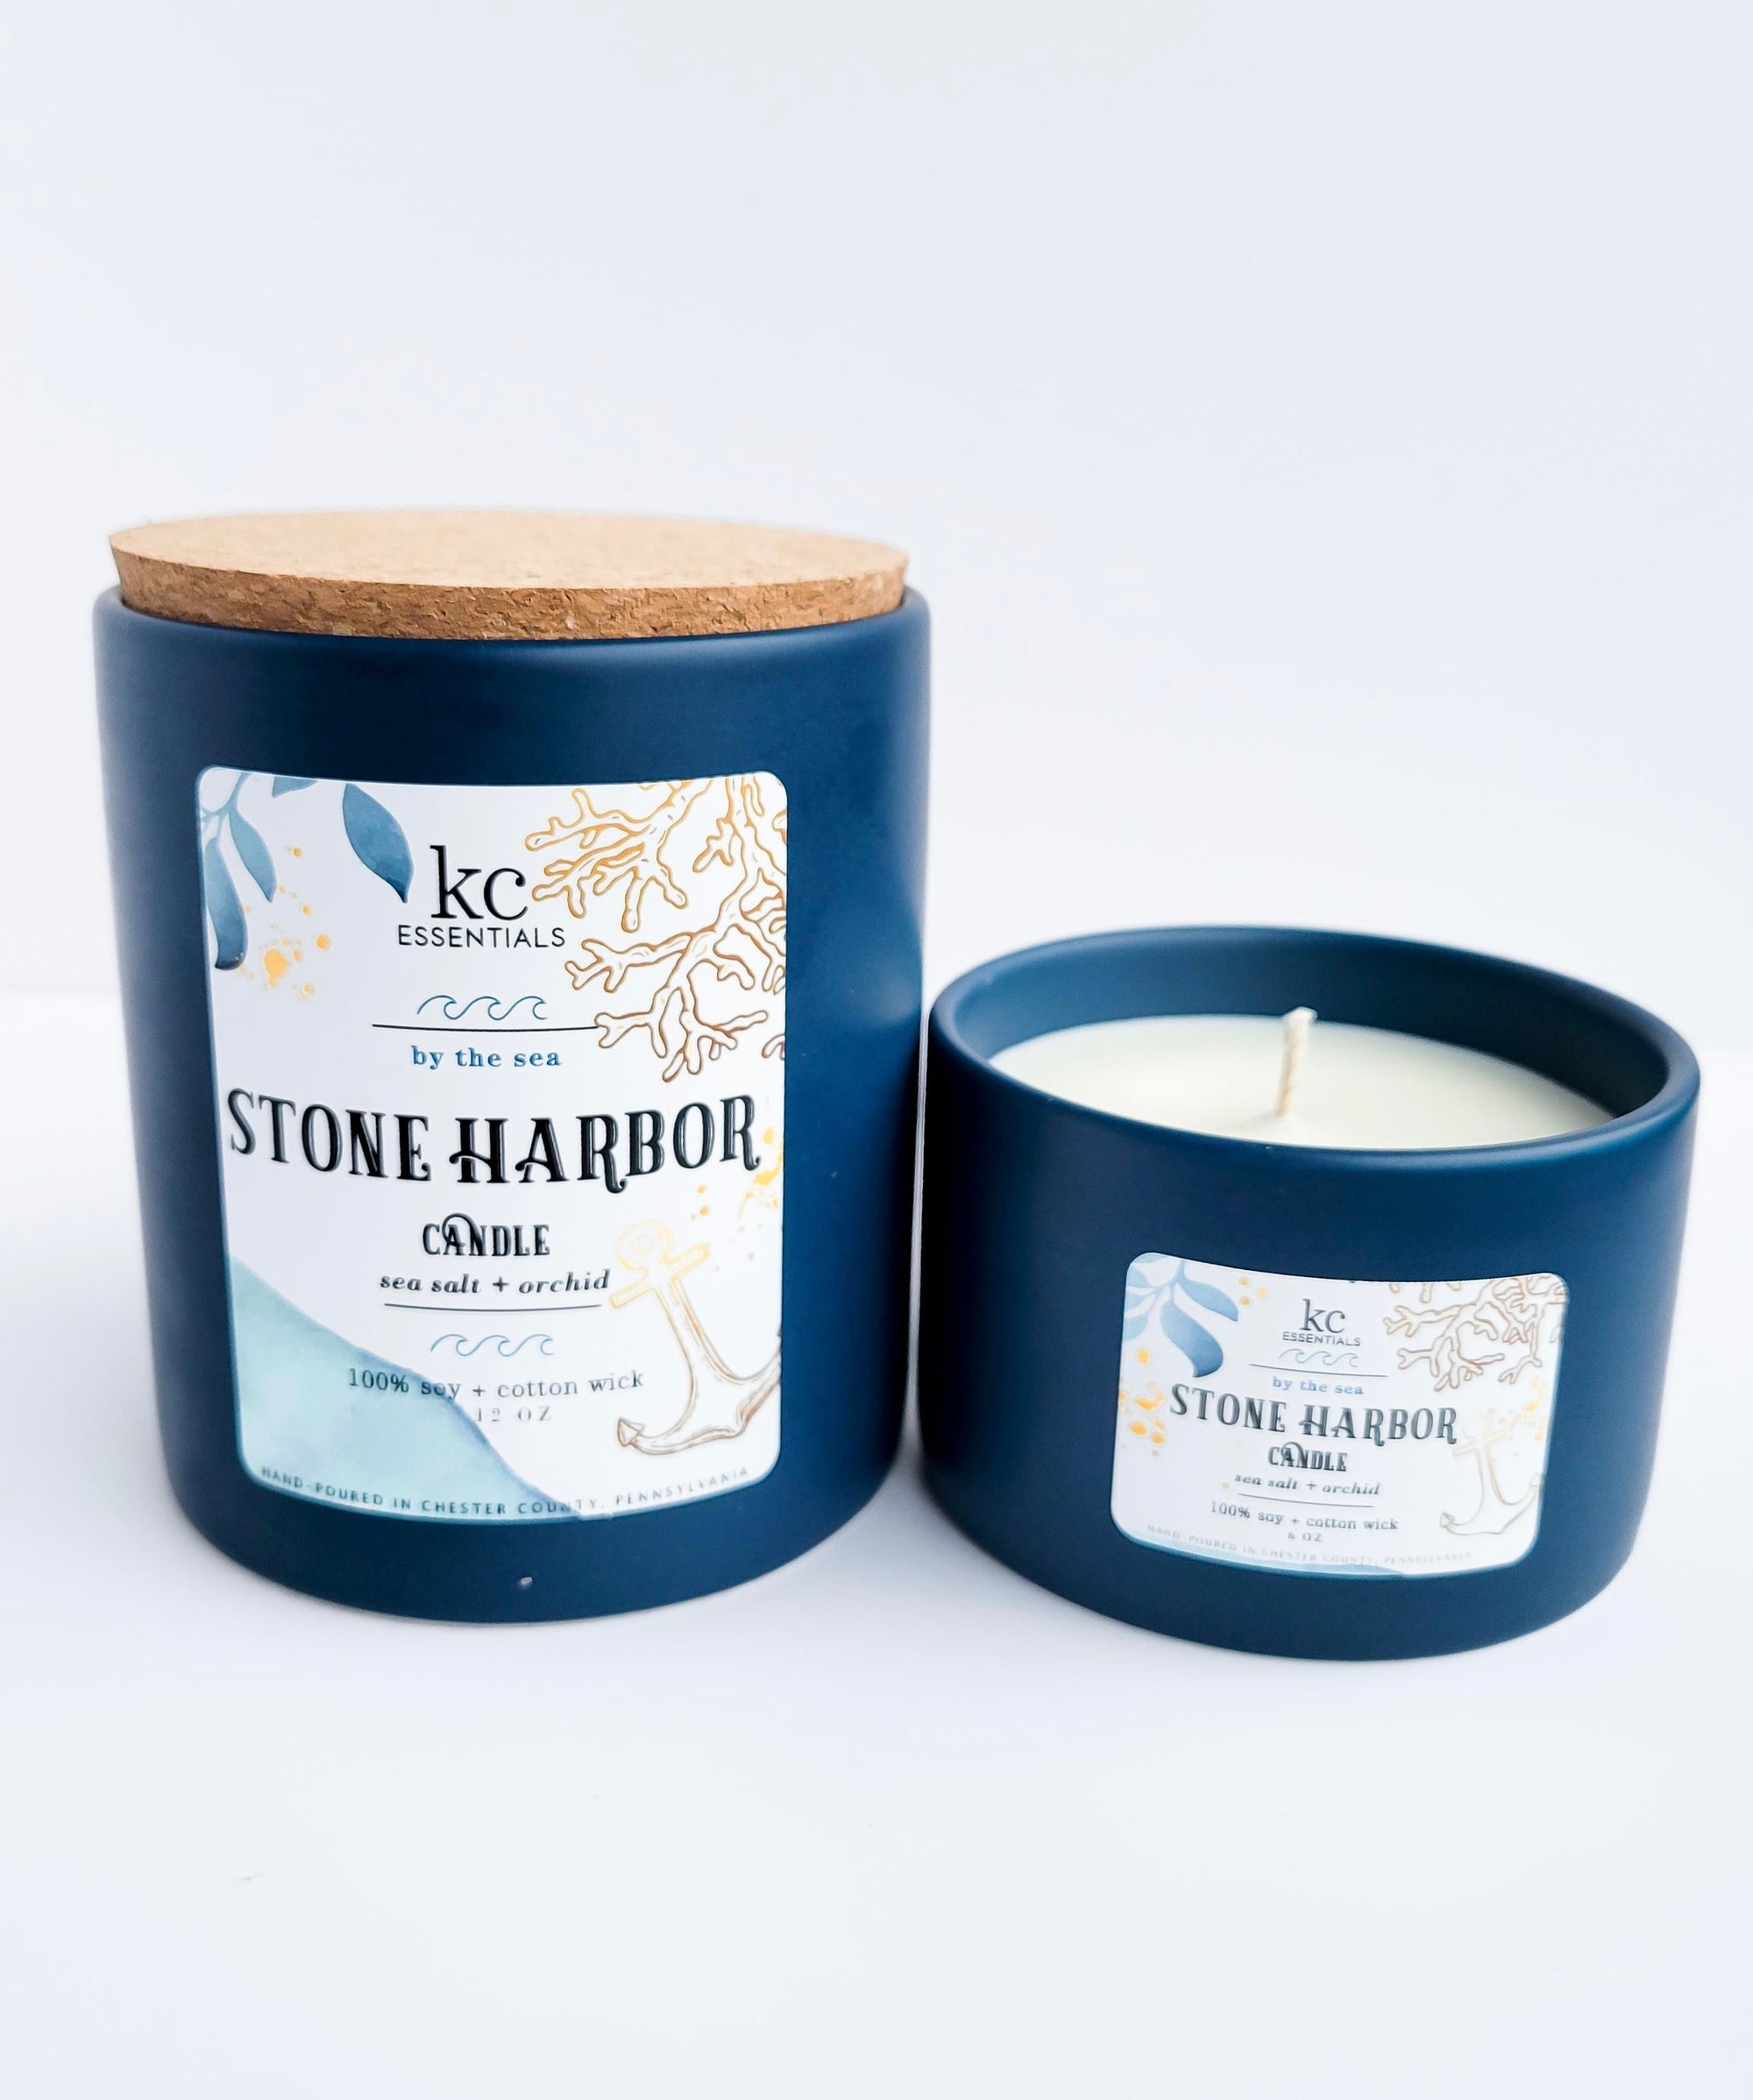 Stone Harbor jersey shore 12 ounce candle made with 100 percent soy, includes cork lid.